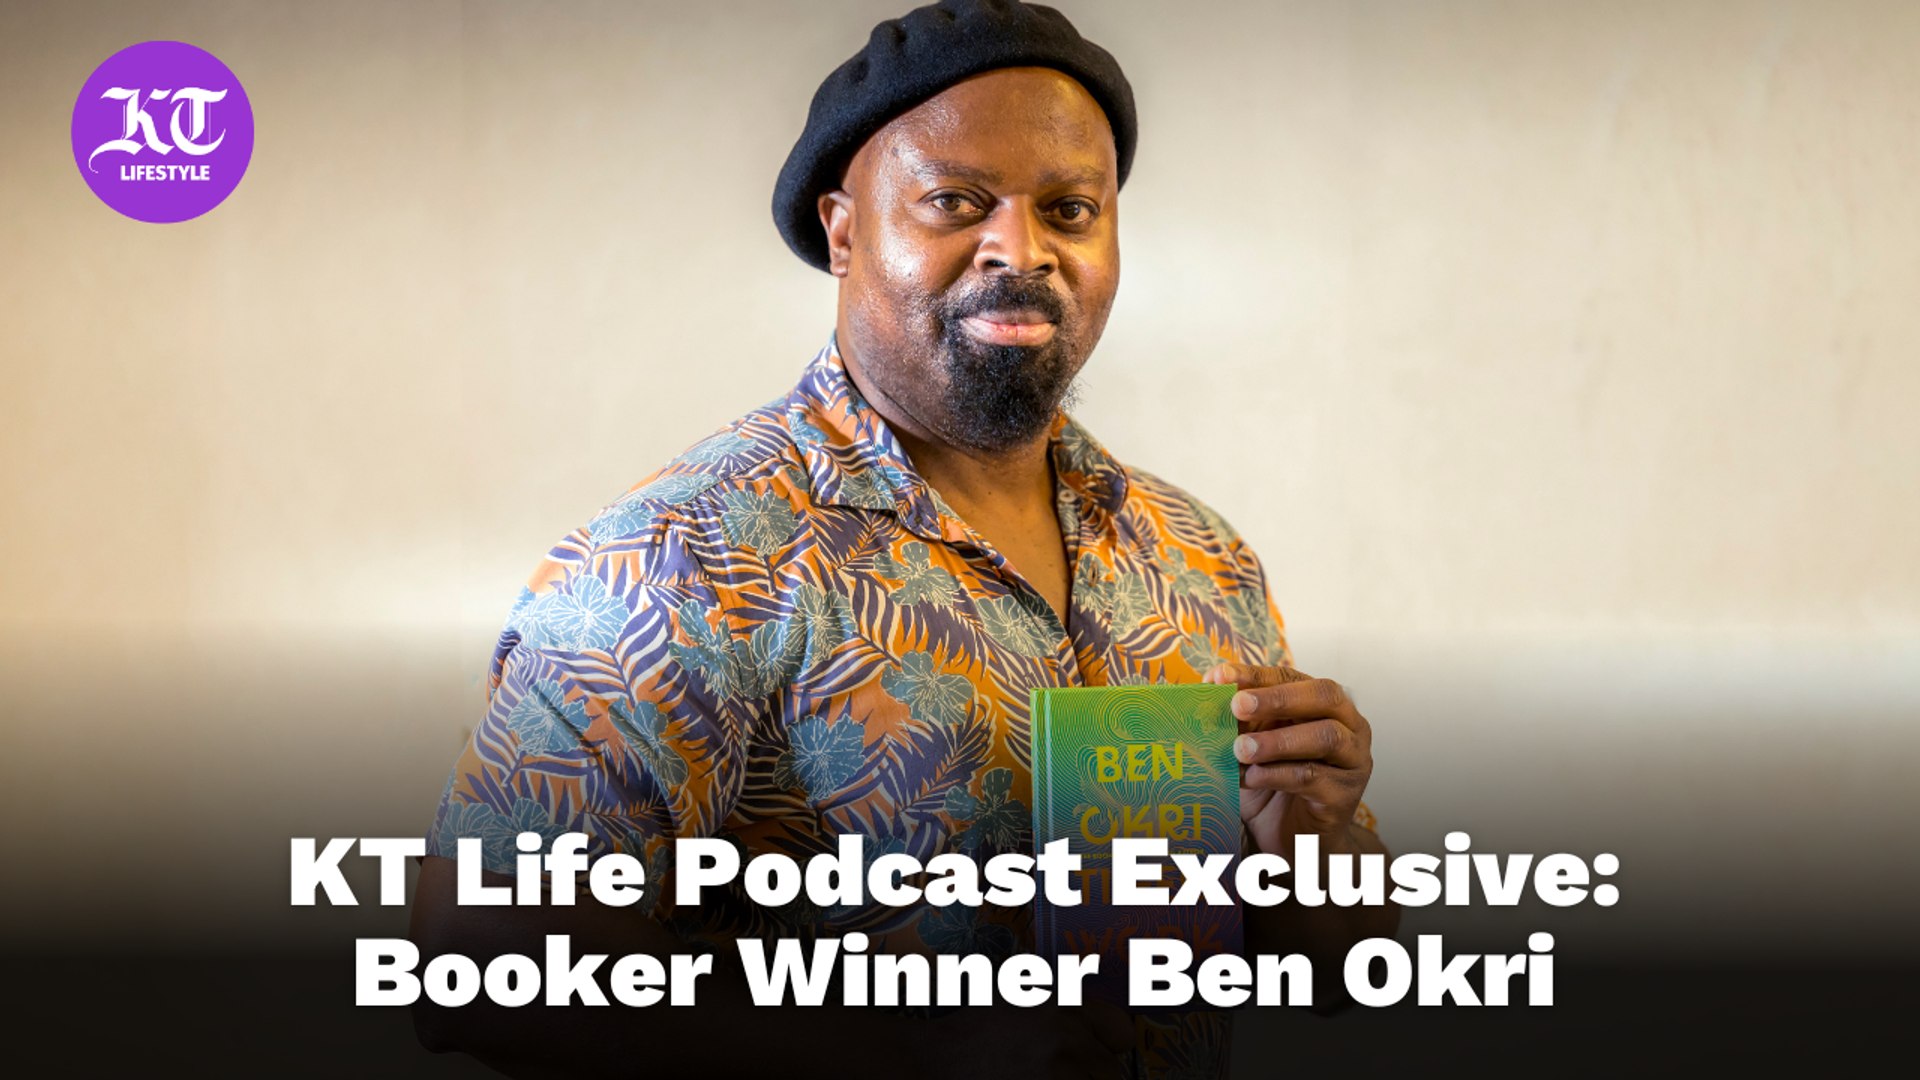 To heal nature we need to heal ourselves": Booker winner Ben Okri on the KT  Life Podcast - video Dailymotion